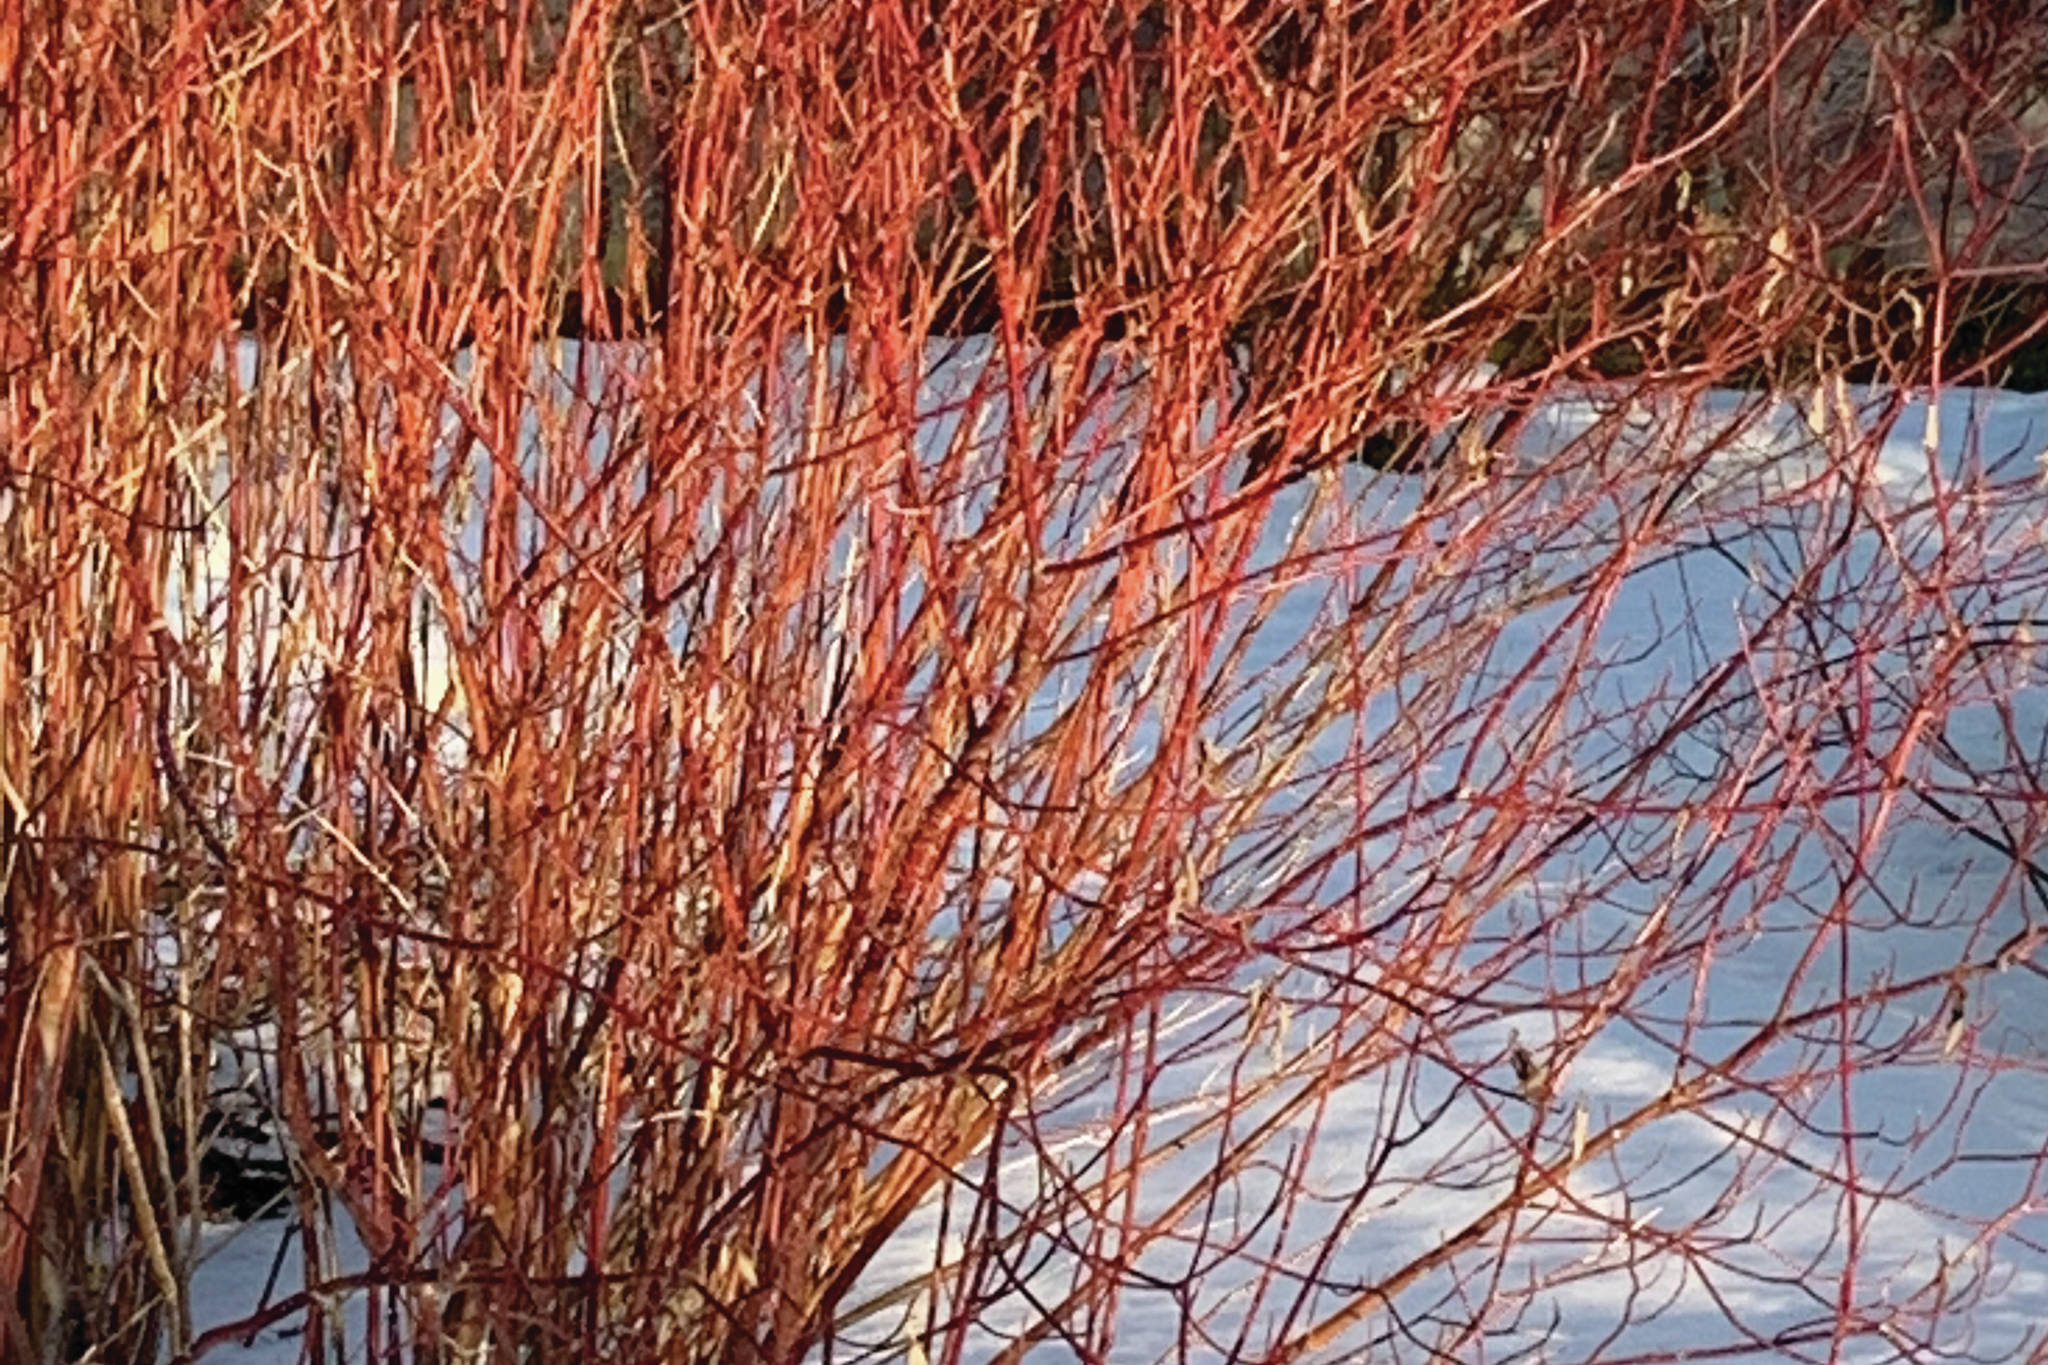 Red twig dogwood doing what it does best on a sunny afternoon on Feb. 17, 2021, at the Kachemak Gardener's home in Homer, Alaska. (Photo by Rosemary Fitzpatrick)